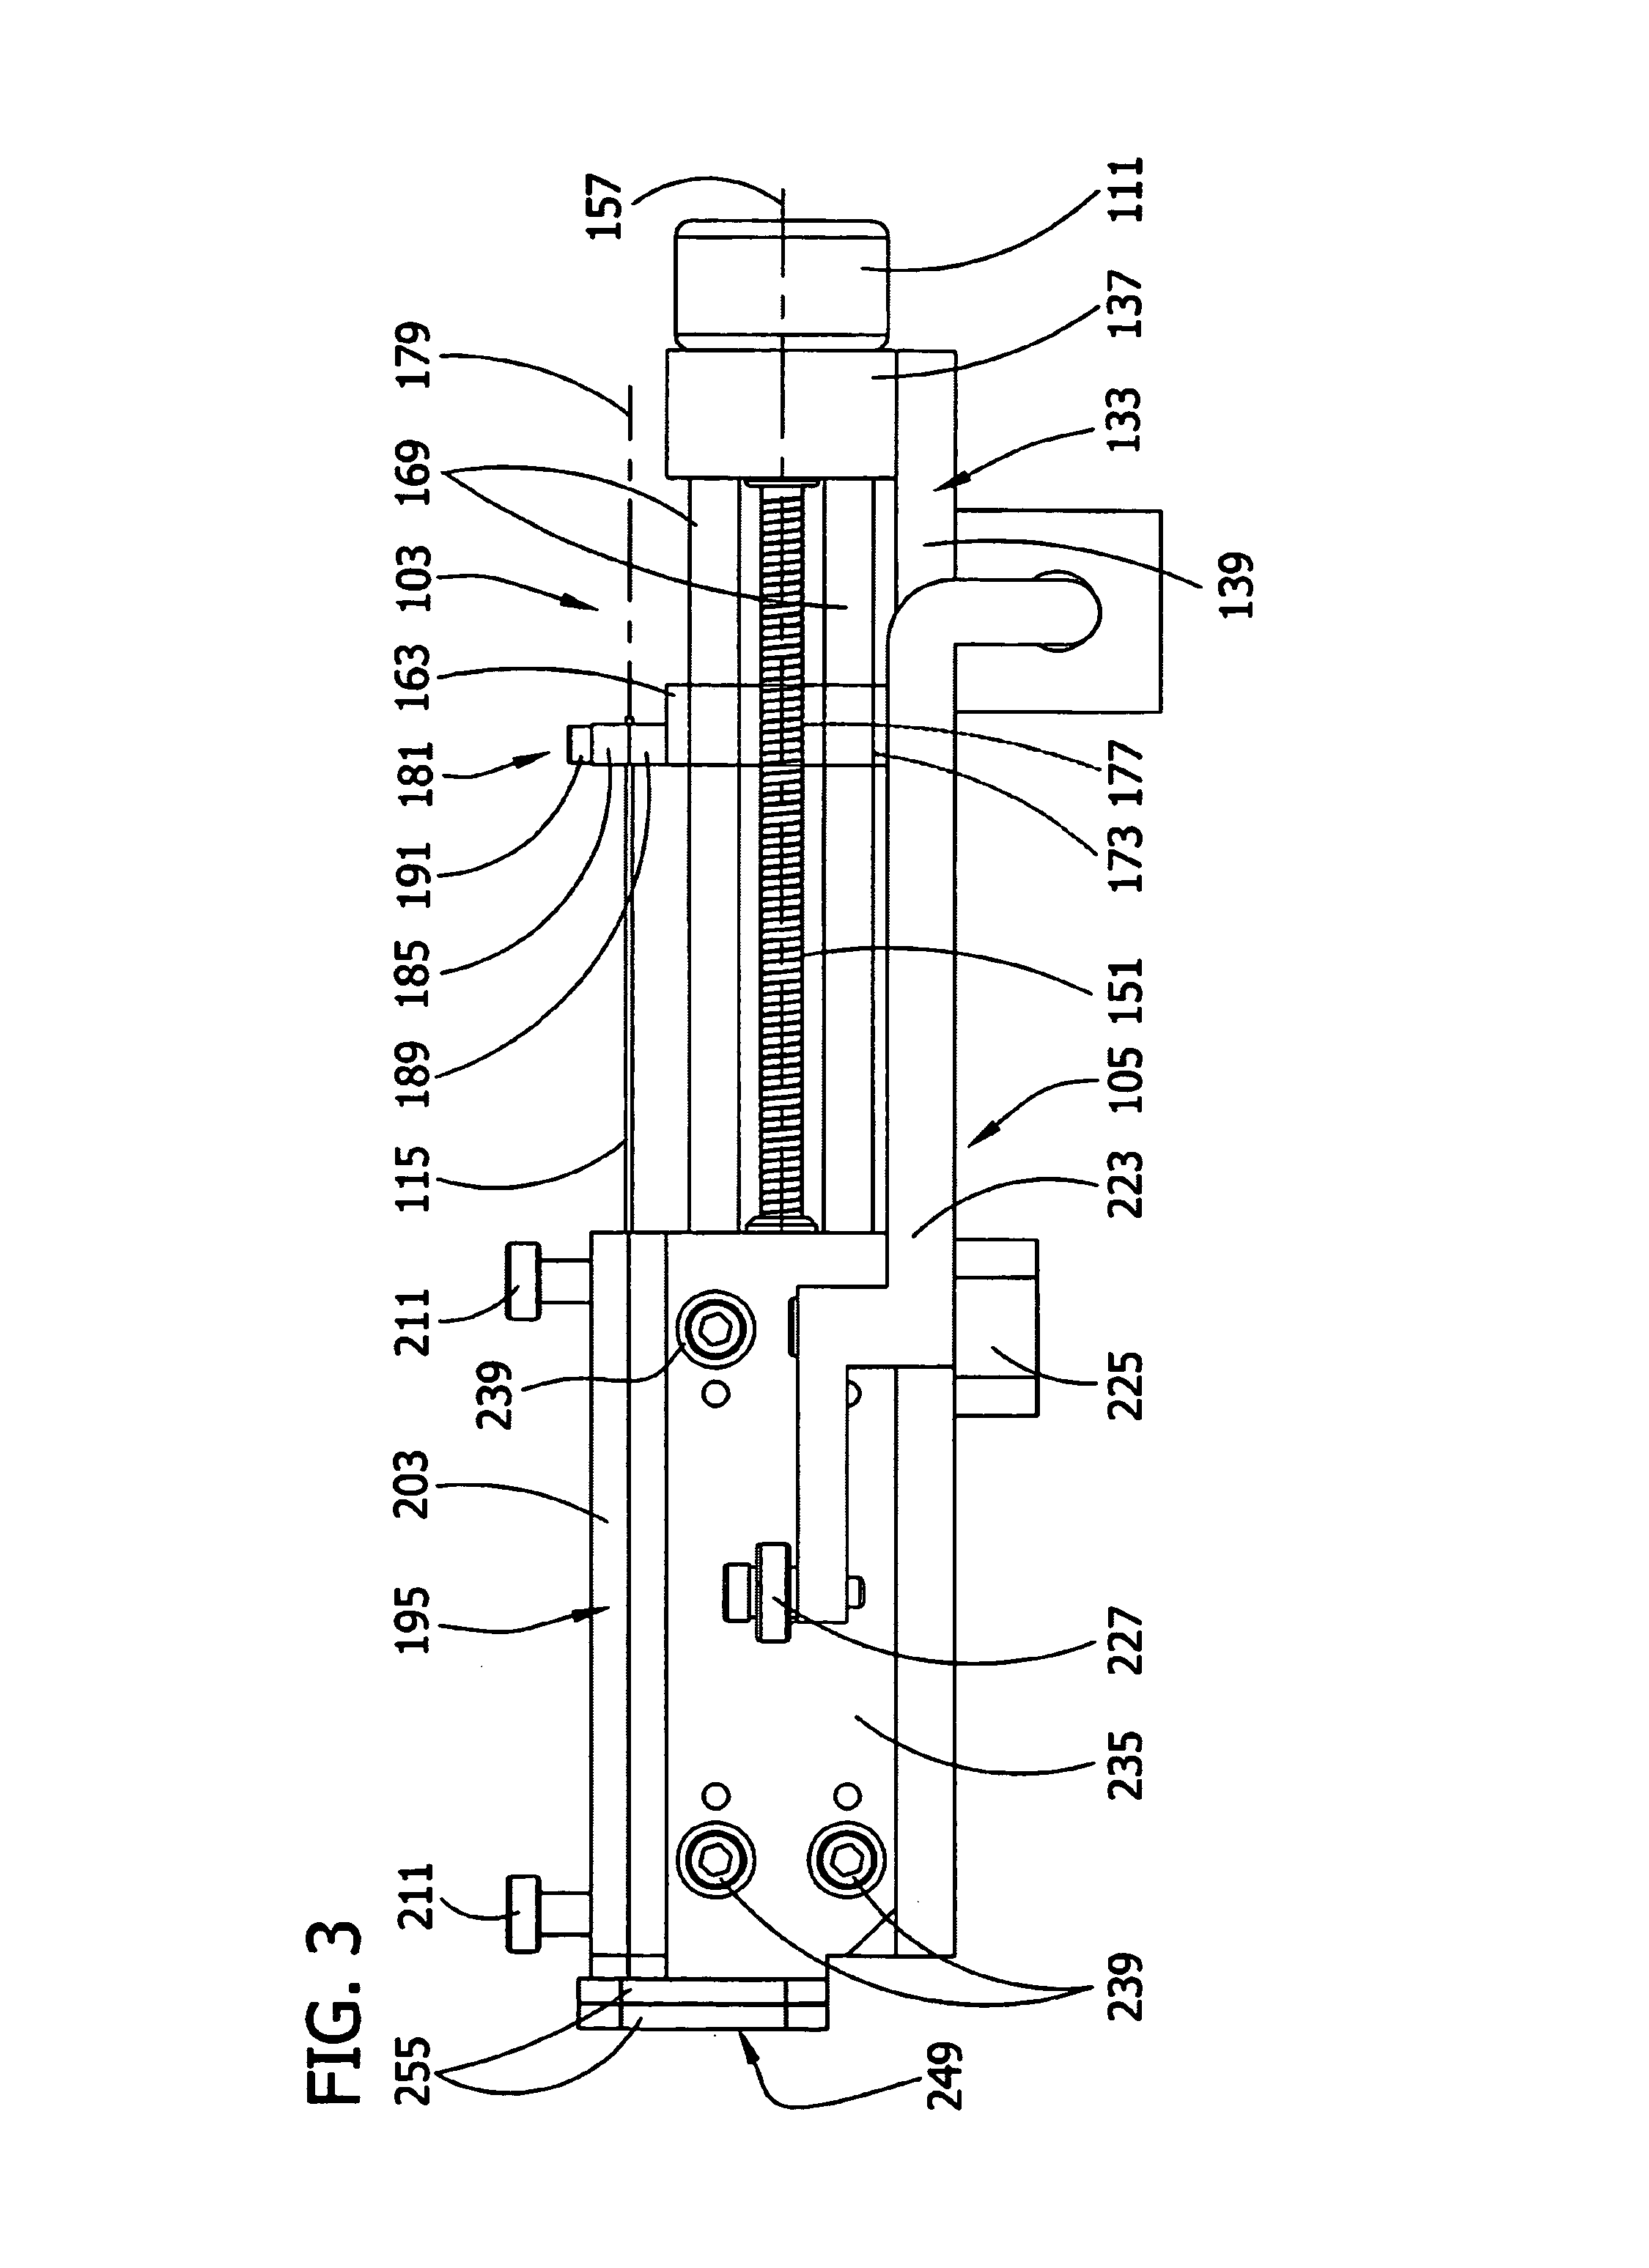 Self-assembling cell aggregates and methods of making engineered tissue using the same